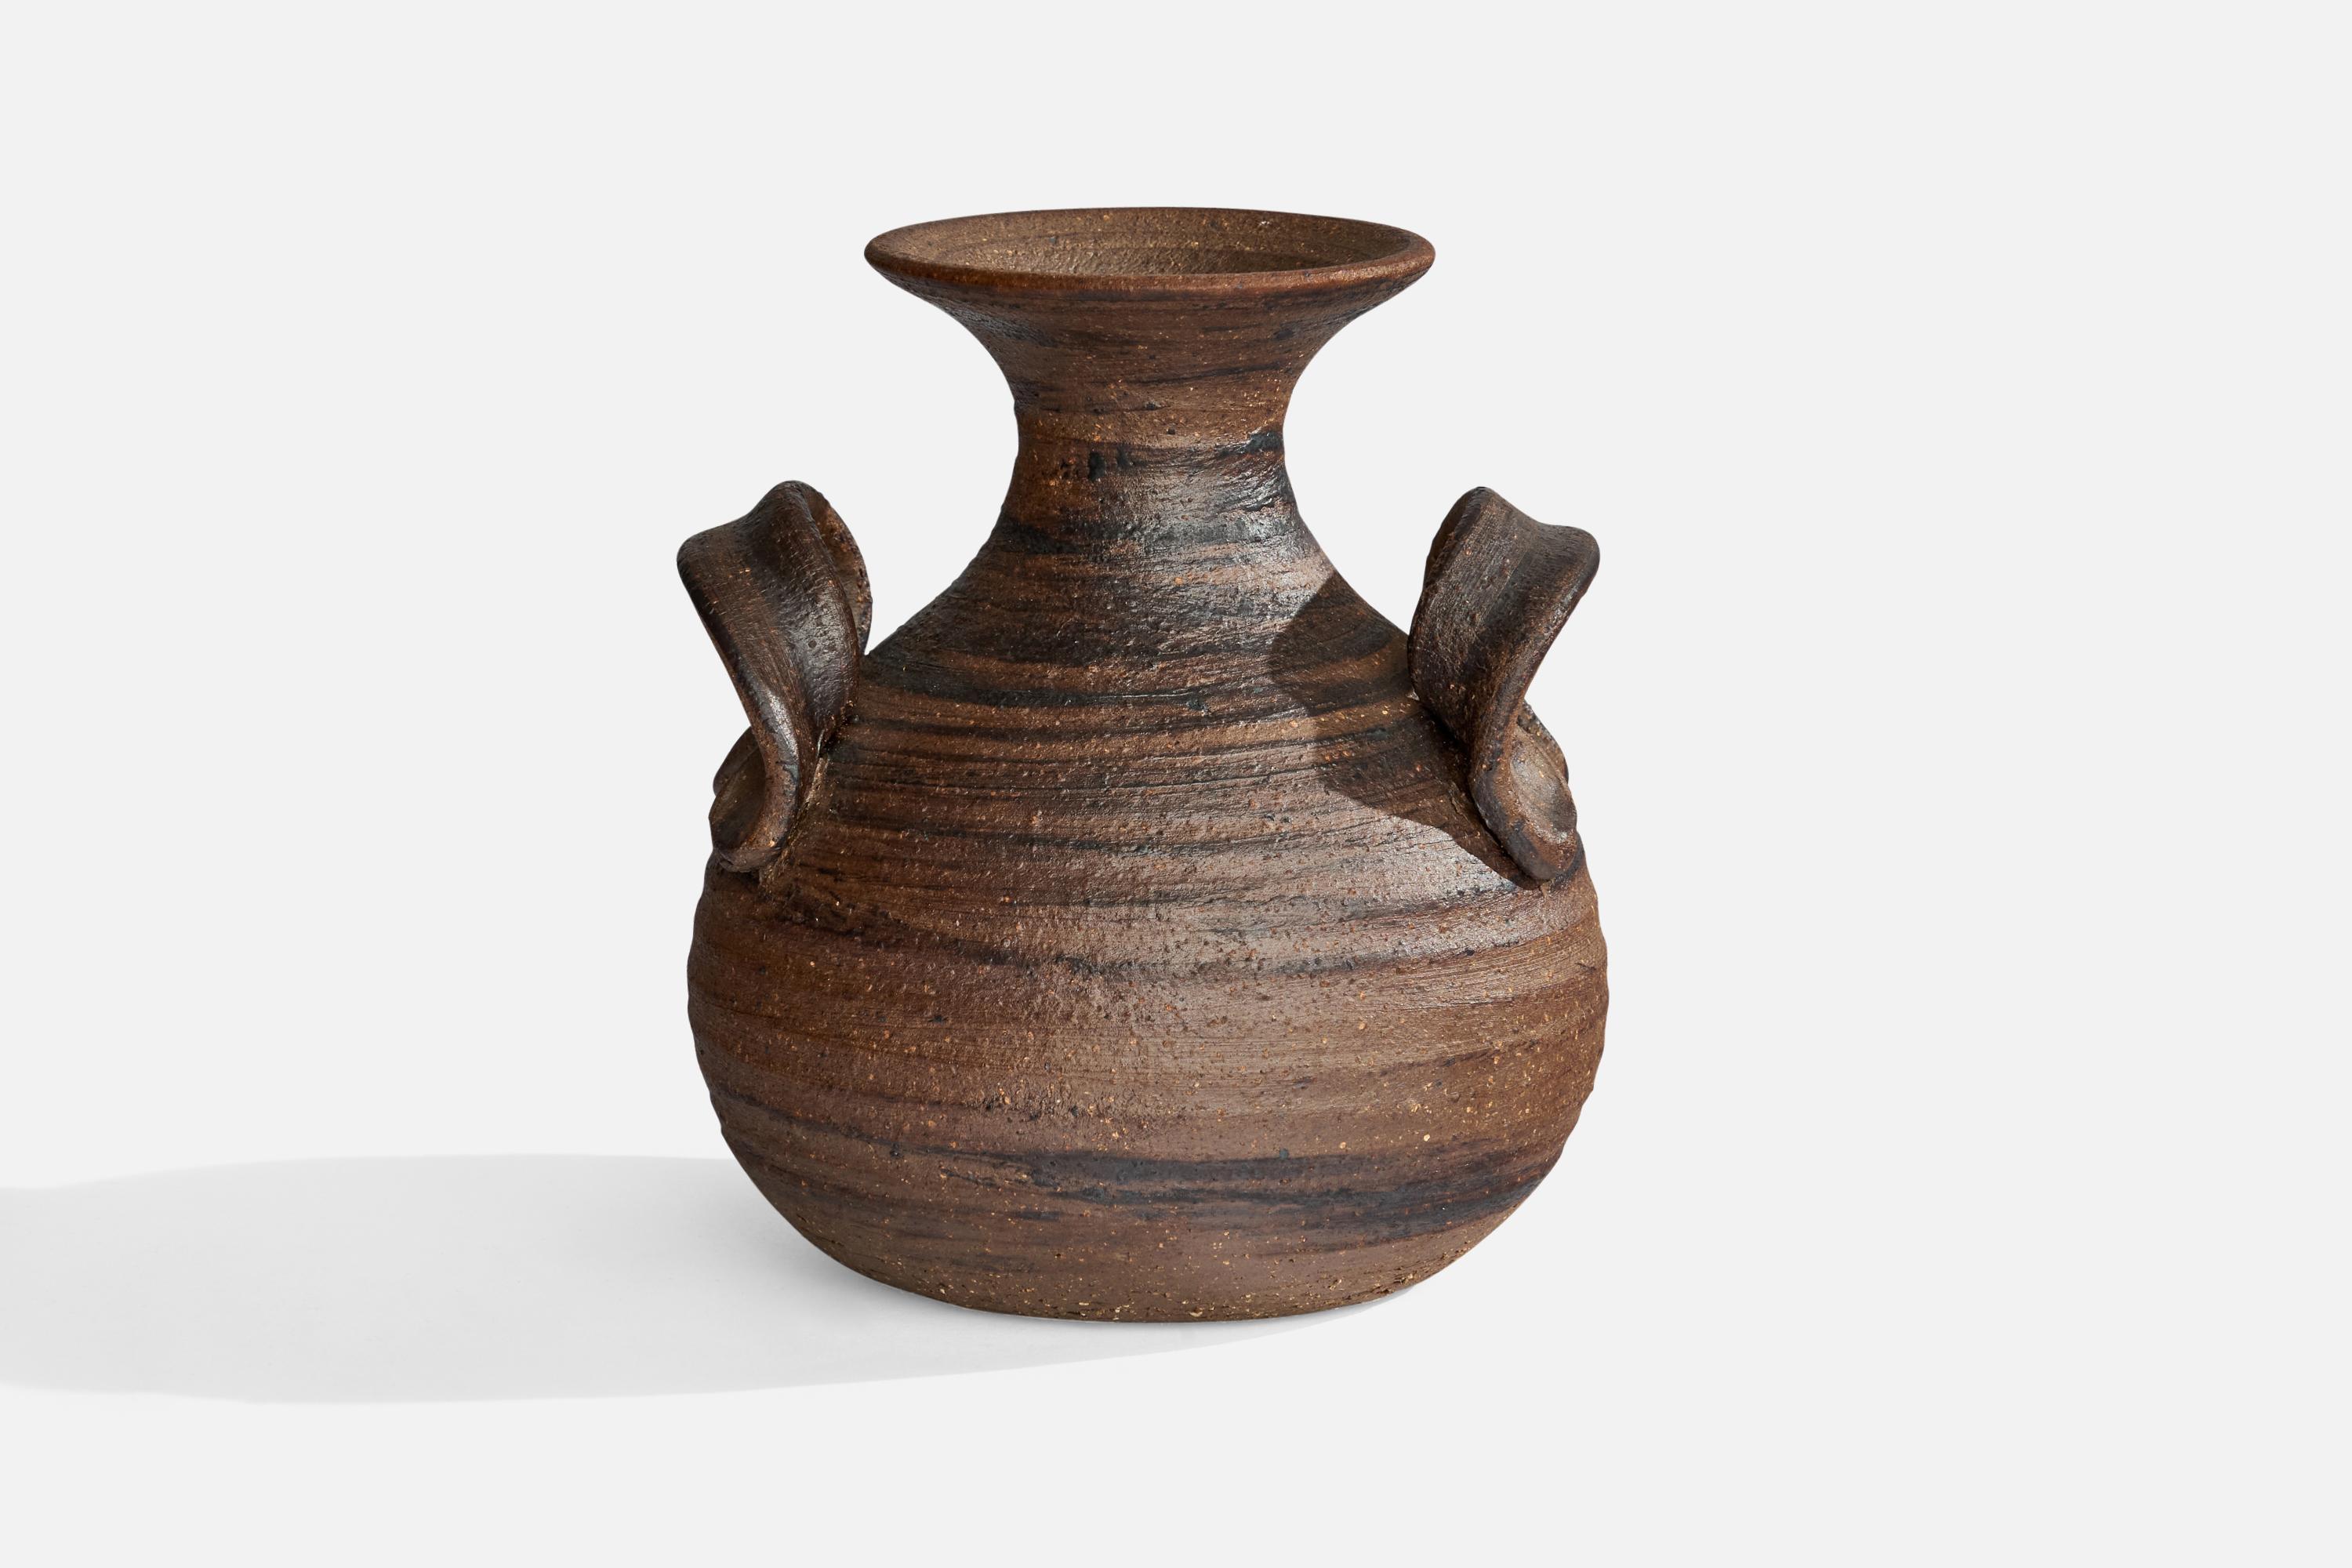 A brown and black-glazed stoneware vase designed and produced in Denmark, c. 1960s.